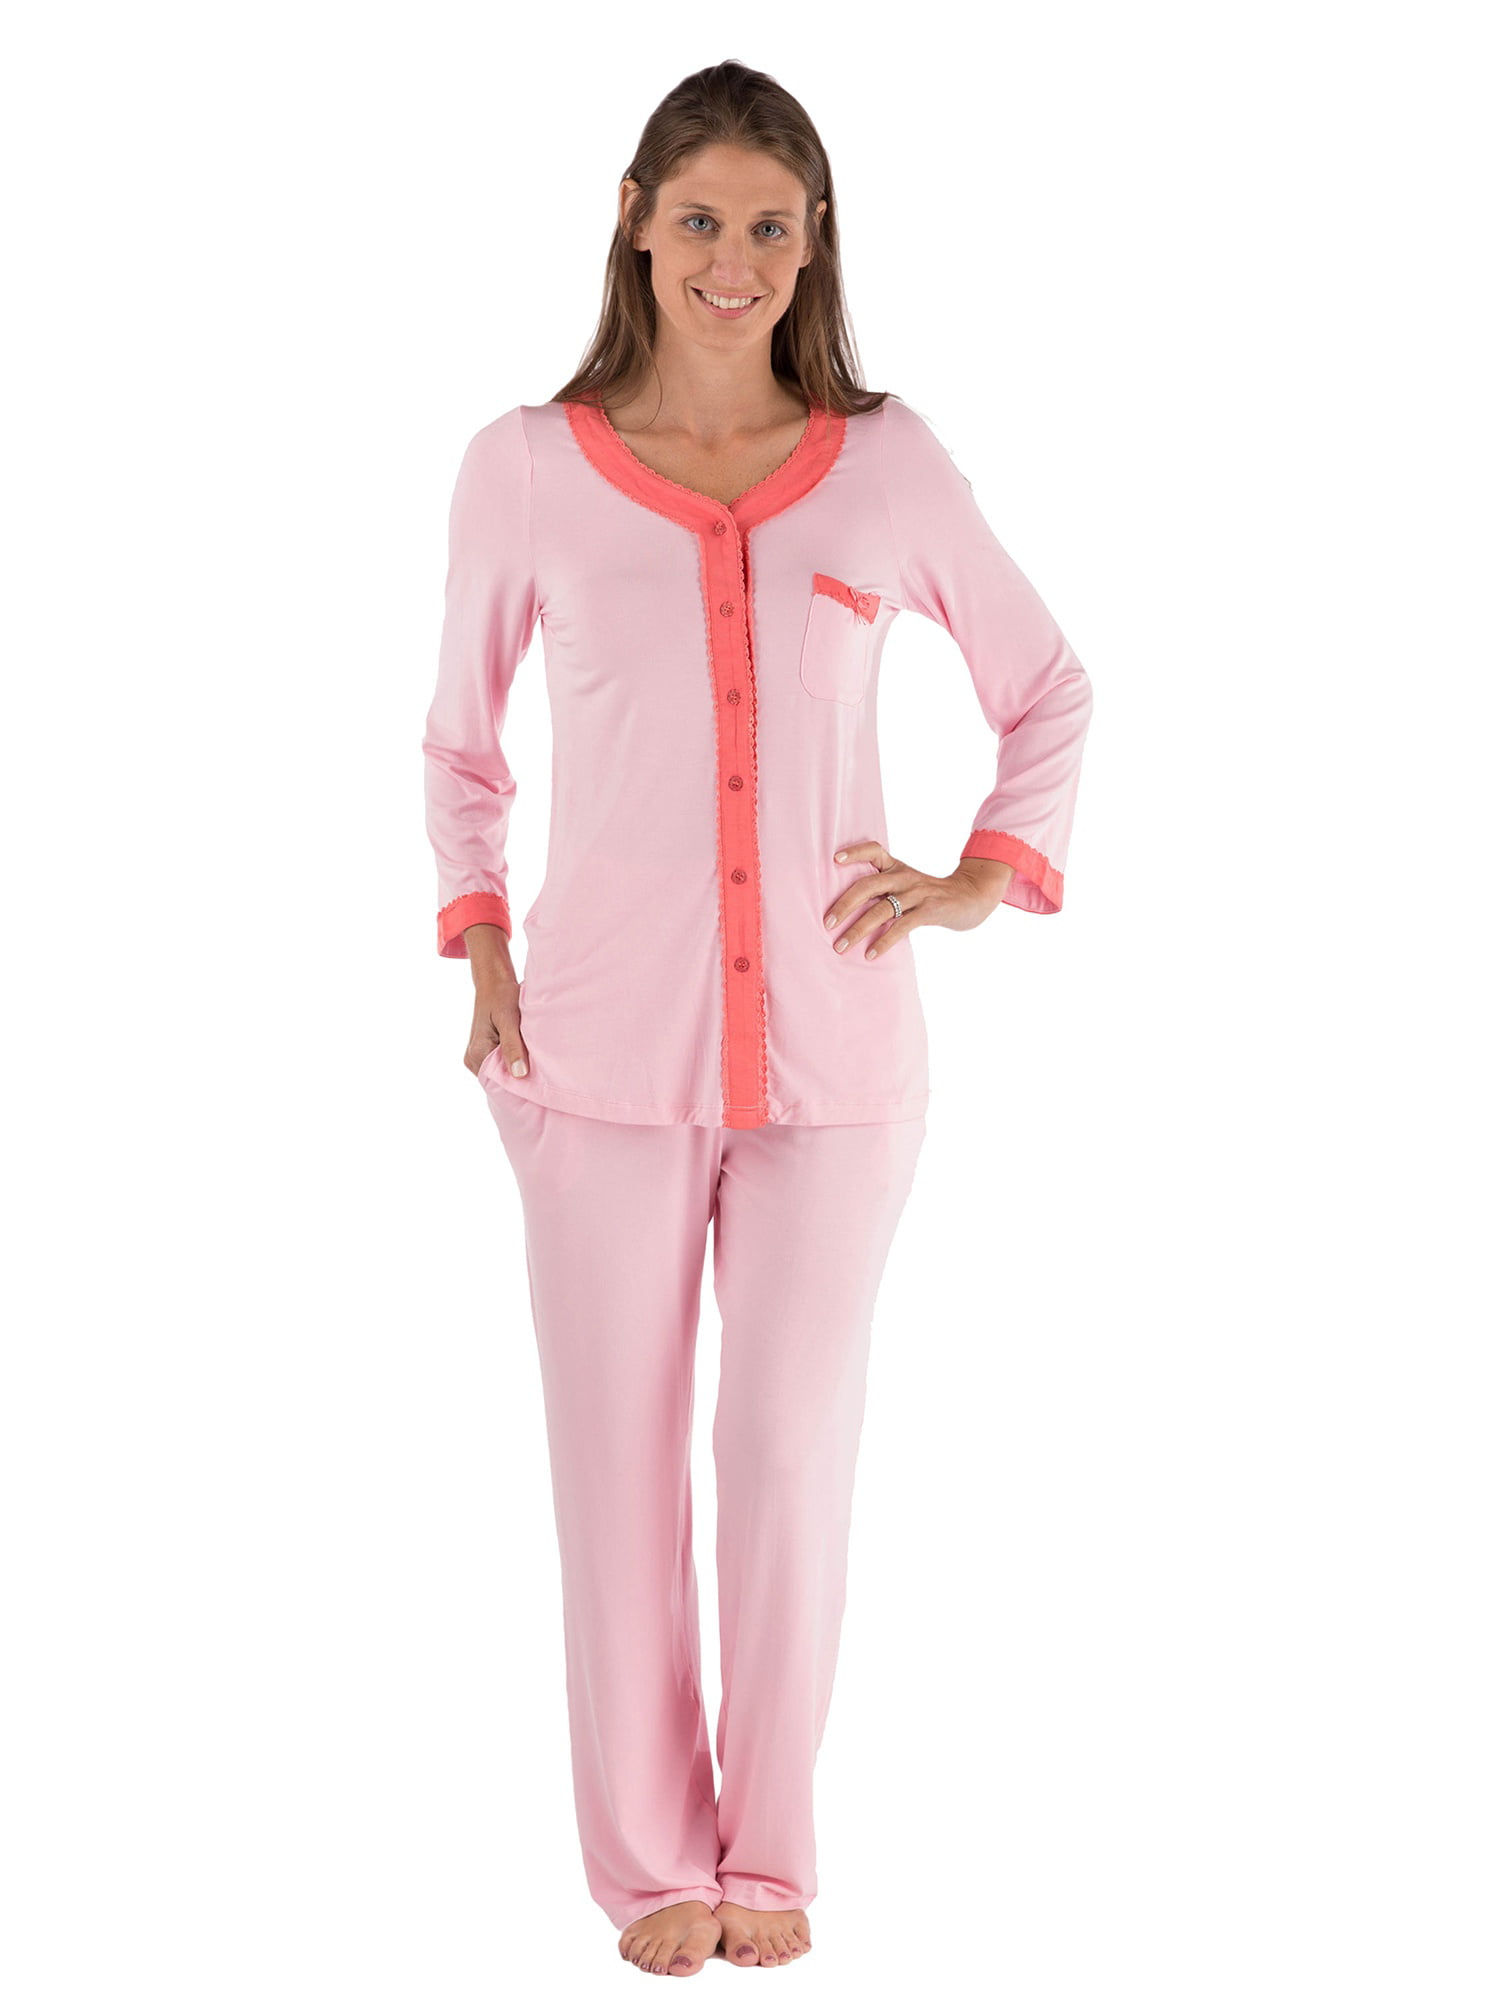 Texere - Women's Long Sleeve Pajama Set - Button Up Sleepwear by Texere